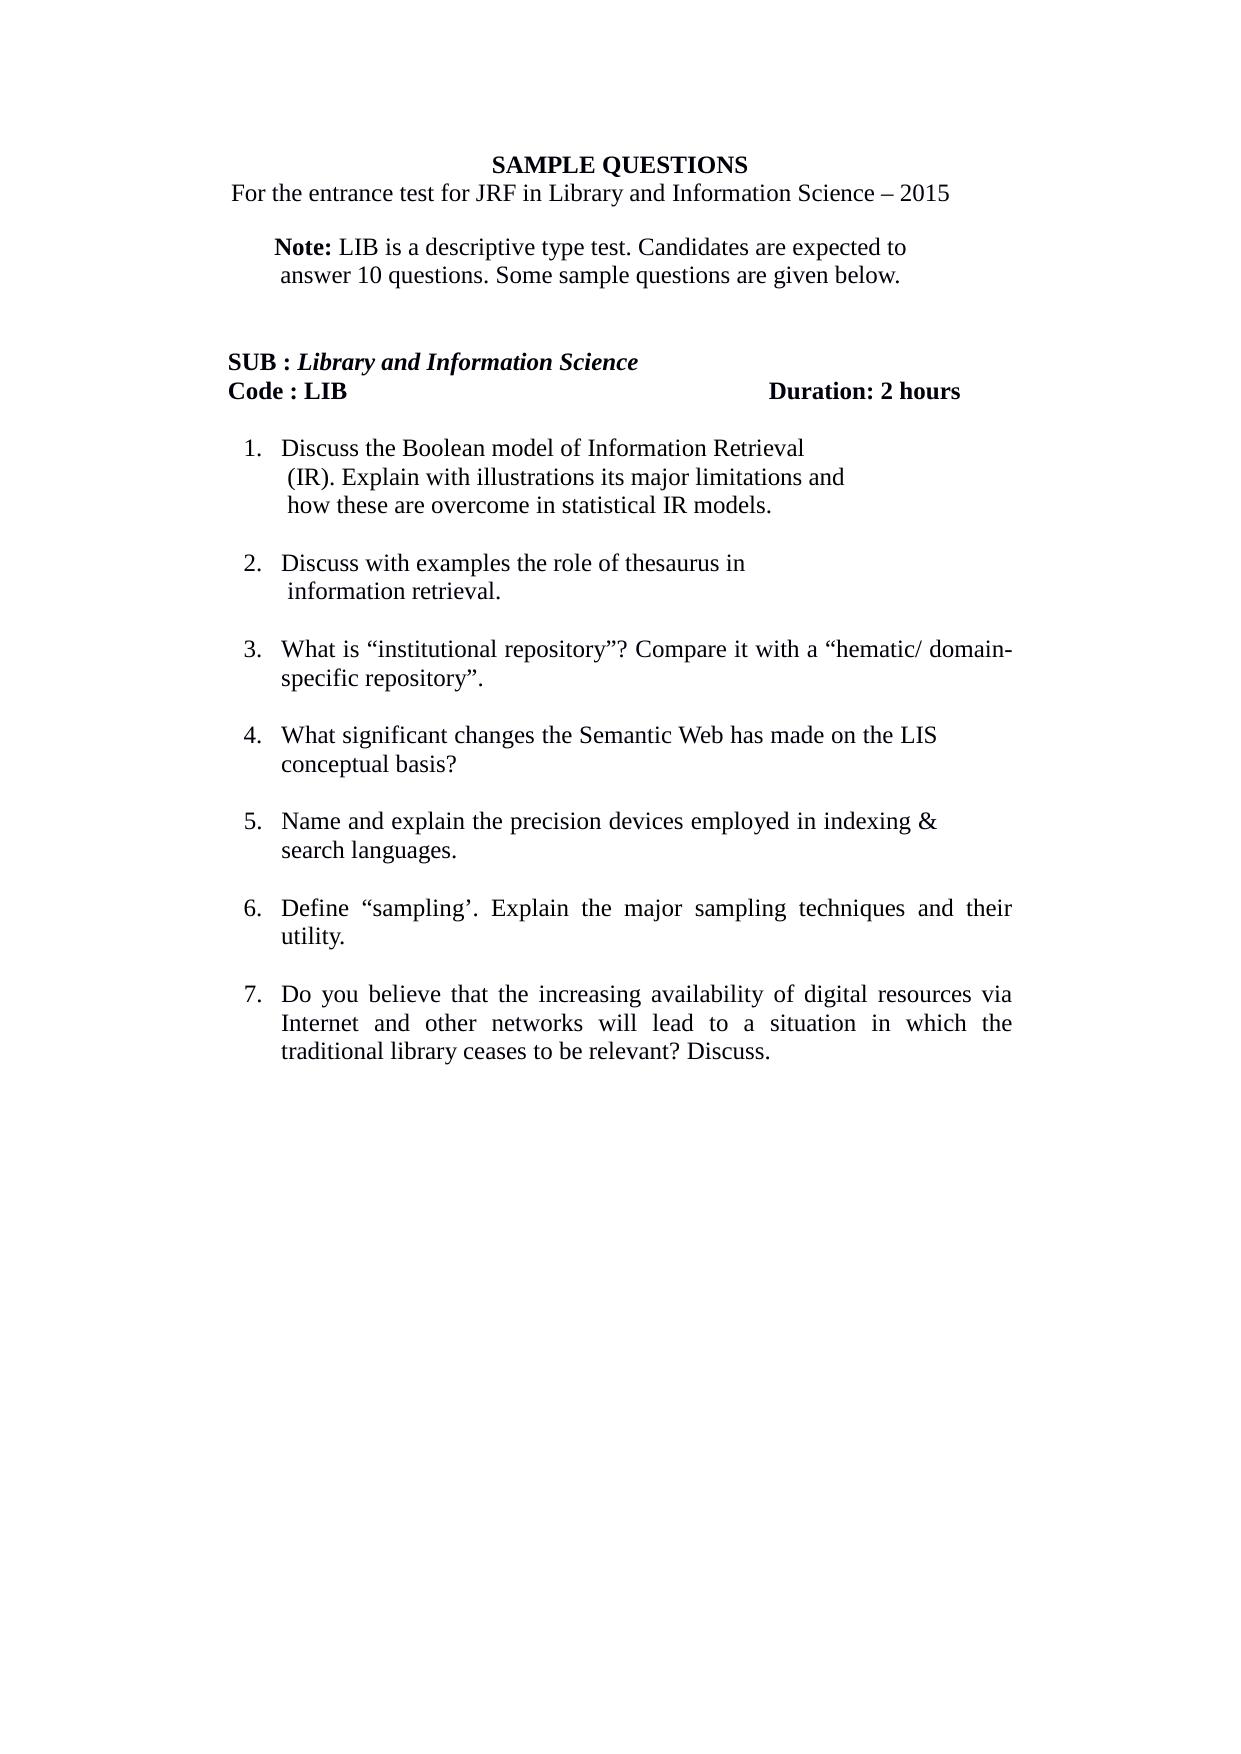 ISI Admission Test JRF in Library and Information Science LIB 2015 Sample Paper - Page 3